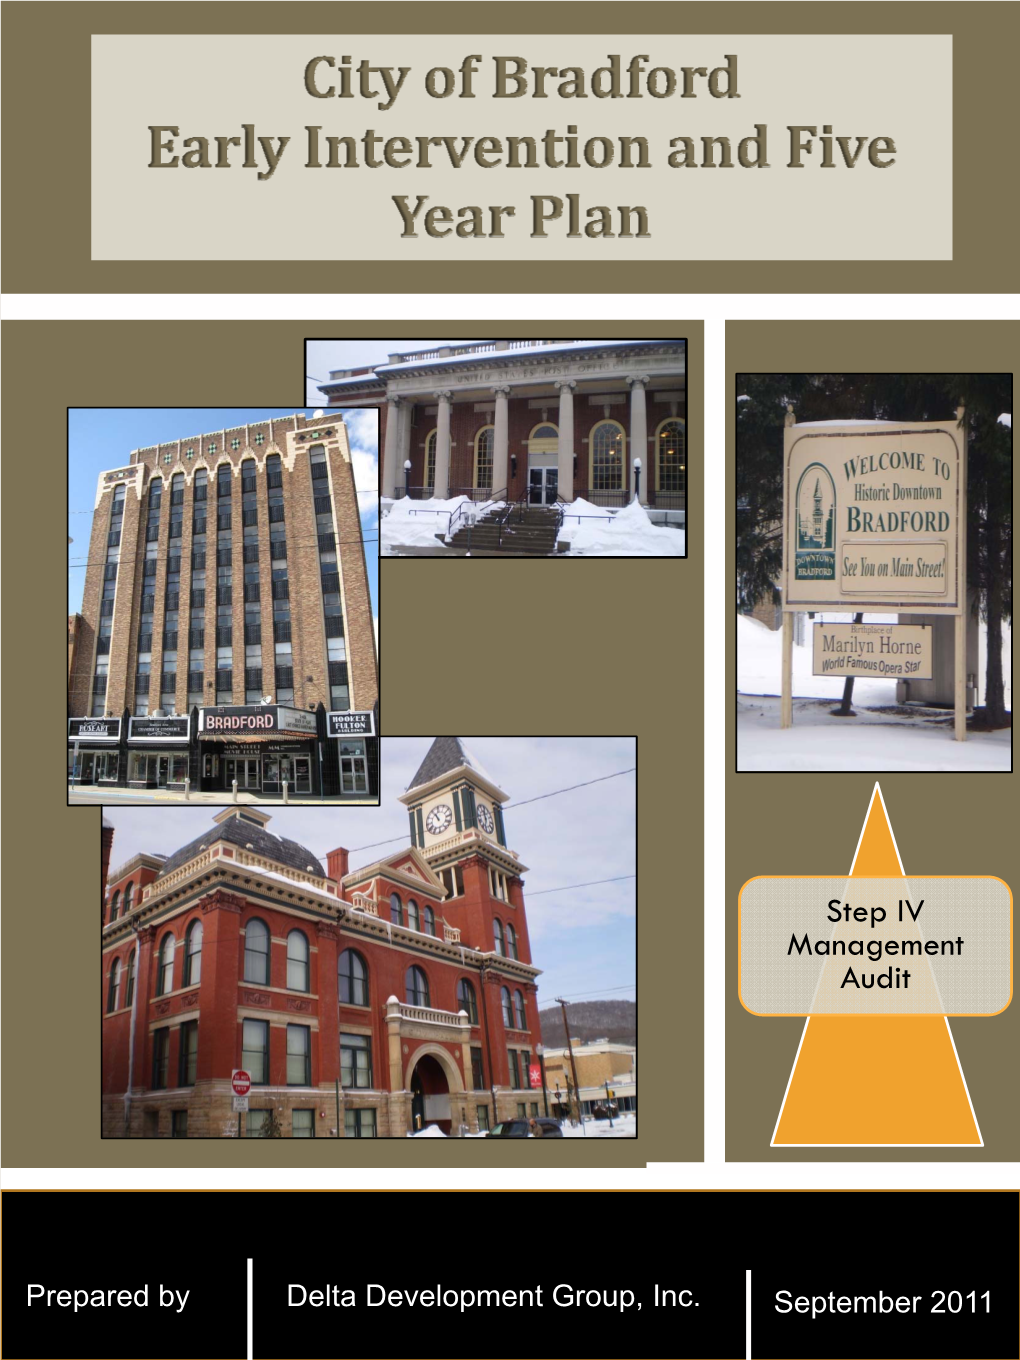 City of Bradford Early Intervention and Five Year Plan